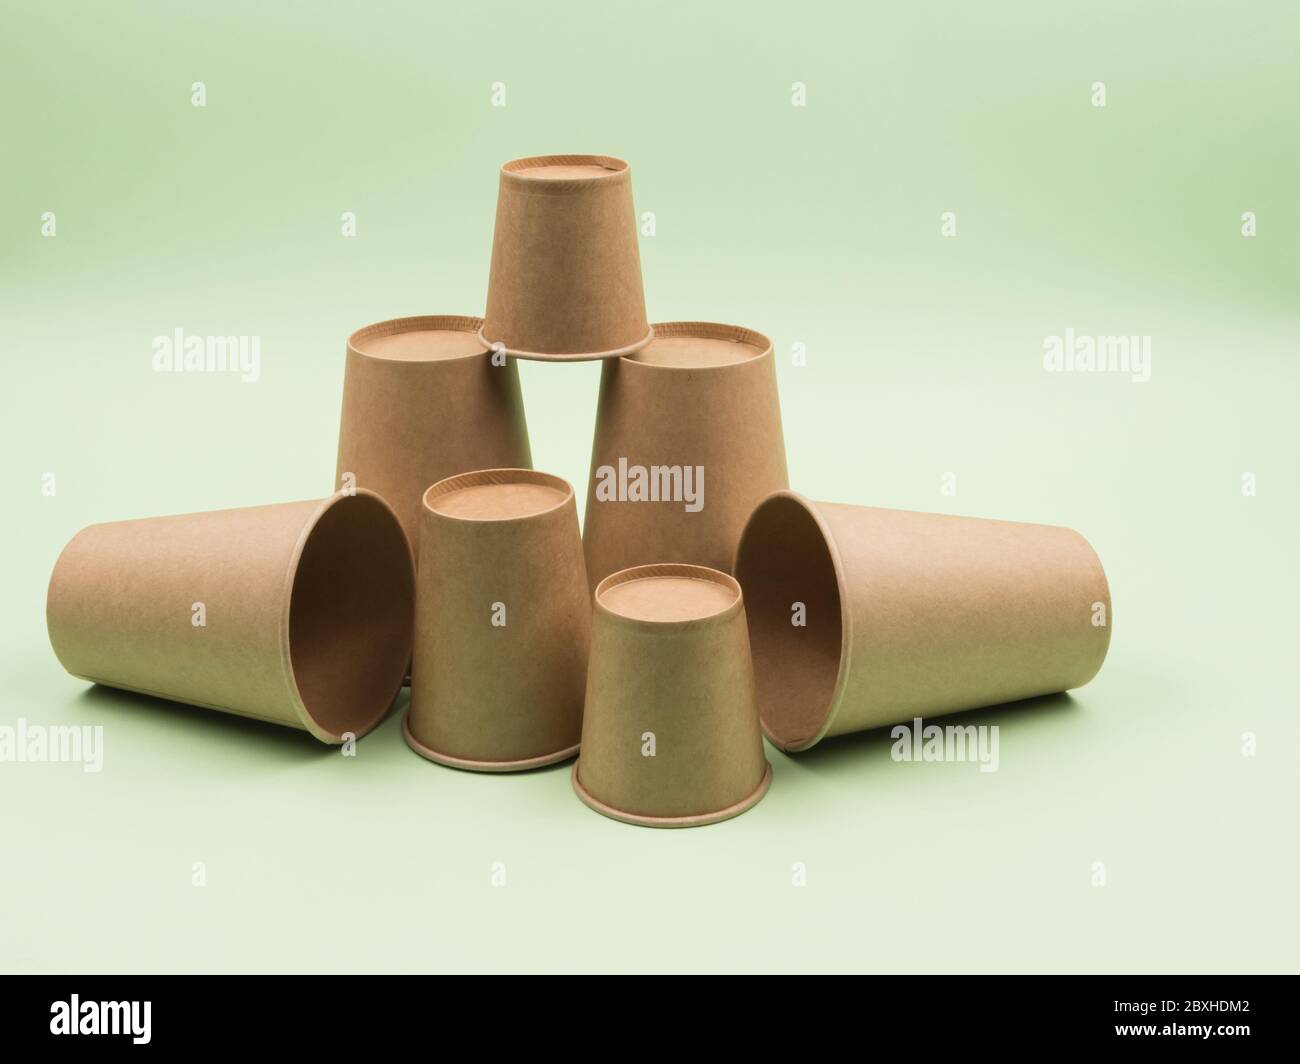 https://c8.alamy.com/comp/2BXHDM2/the-ecological-pyramid-of-paper-cups-2BXHDM2.jpg